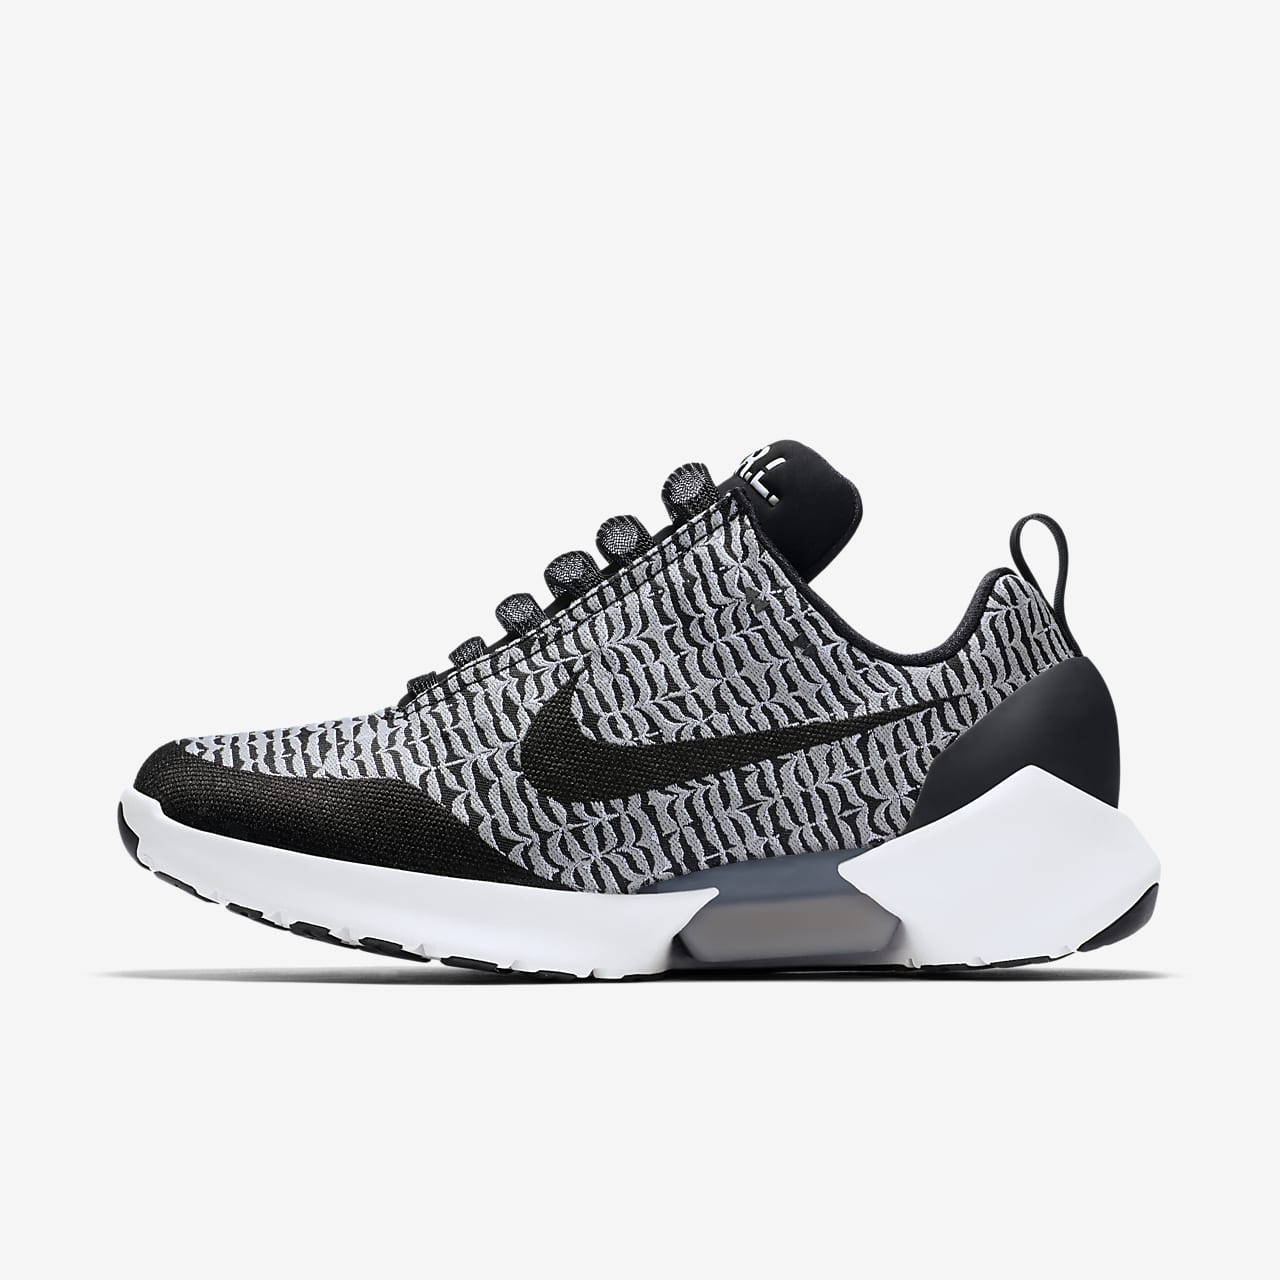 nike hyperadapt 1.0 price clothes shoes online